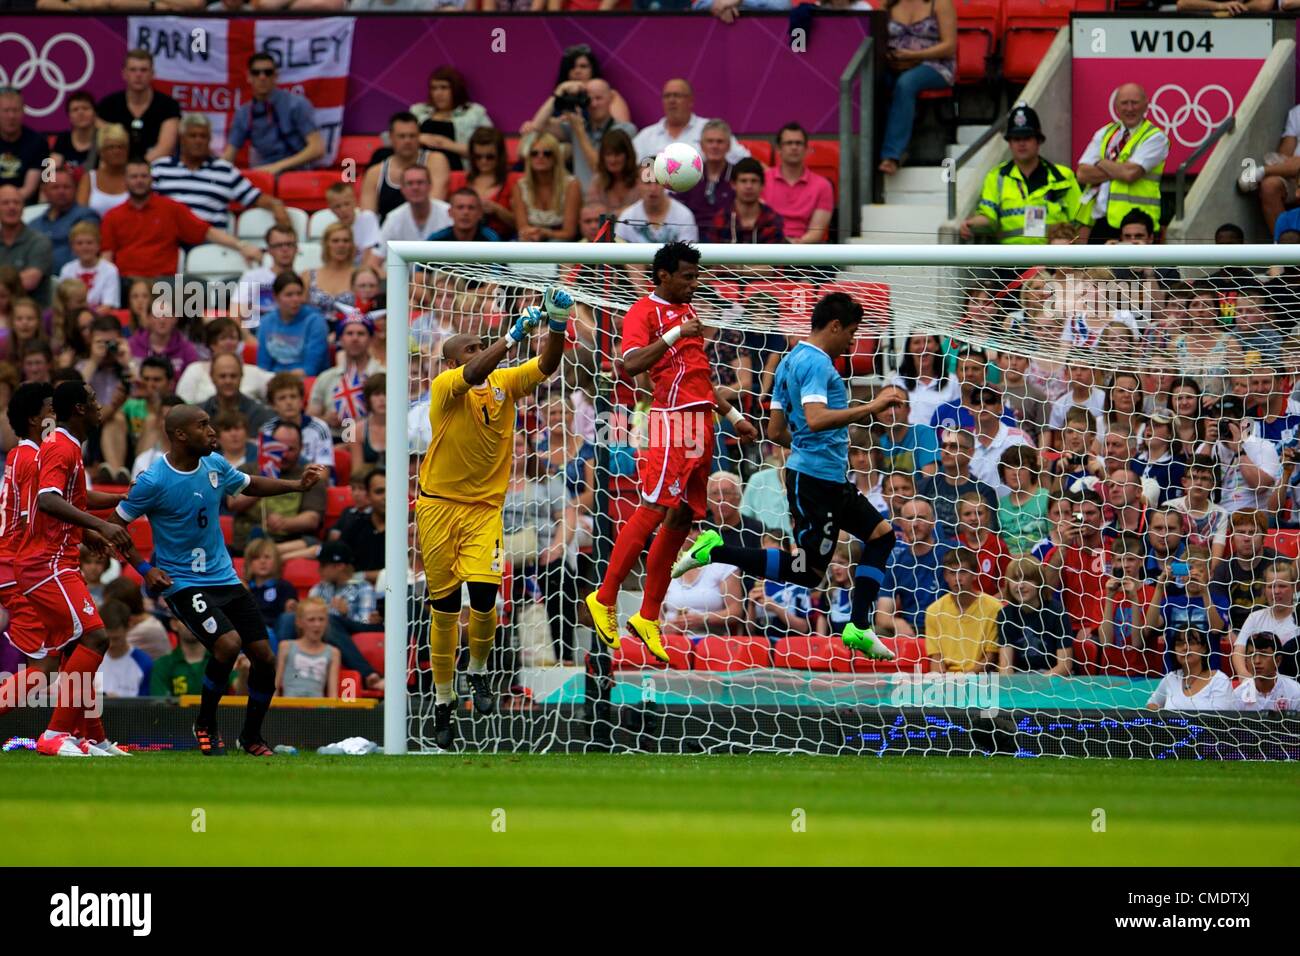 26.07.2012 Manchester, England. United Arab Emirates goalkeeper Ali Khasif in action during the first round group A mens match between United Arab Emirates and Uruguay at Old Trafford. Stock Photo